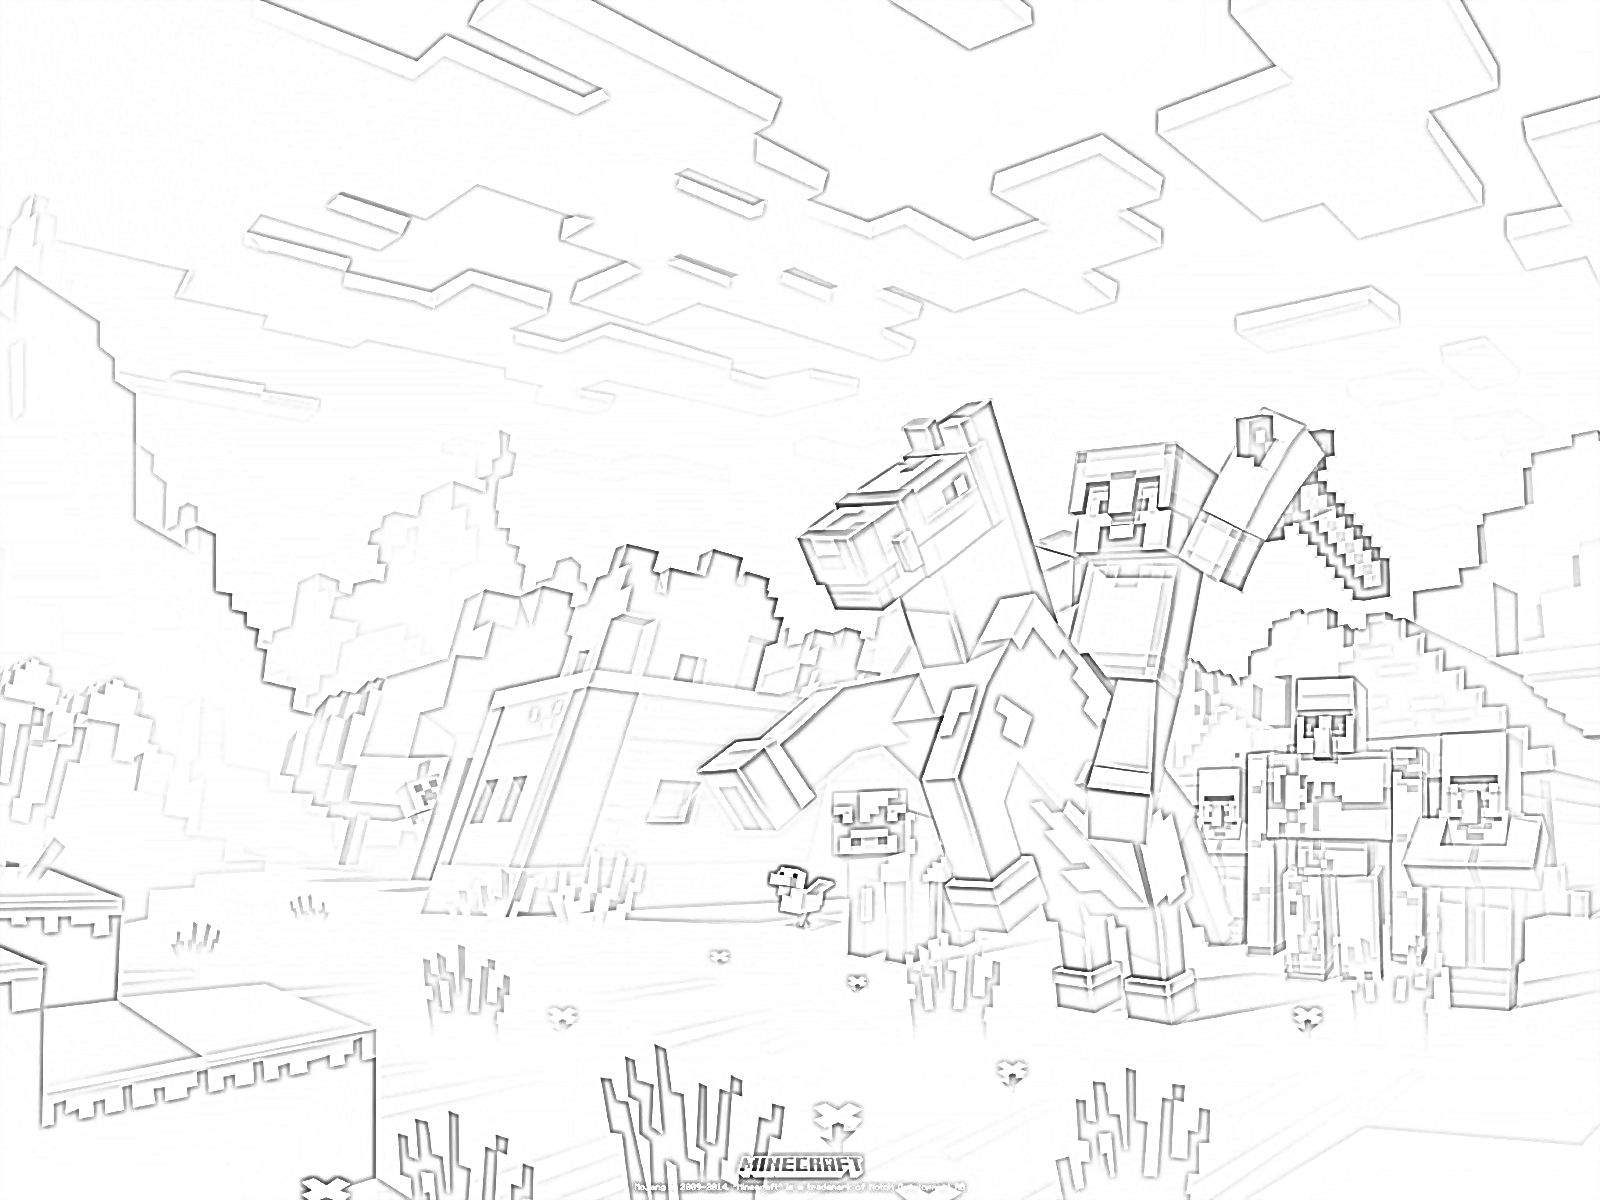 Minecraft Horse - Coloring page